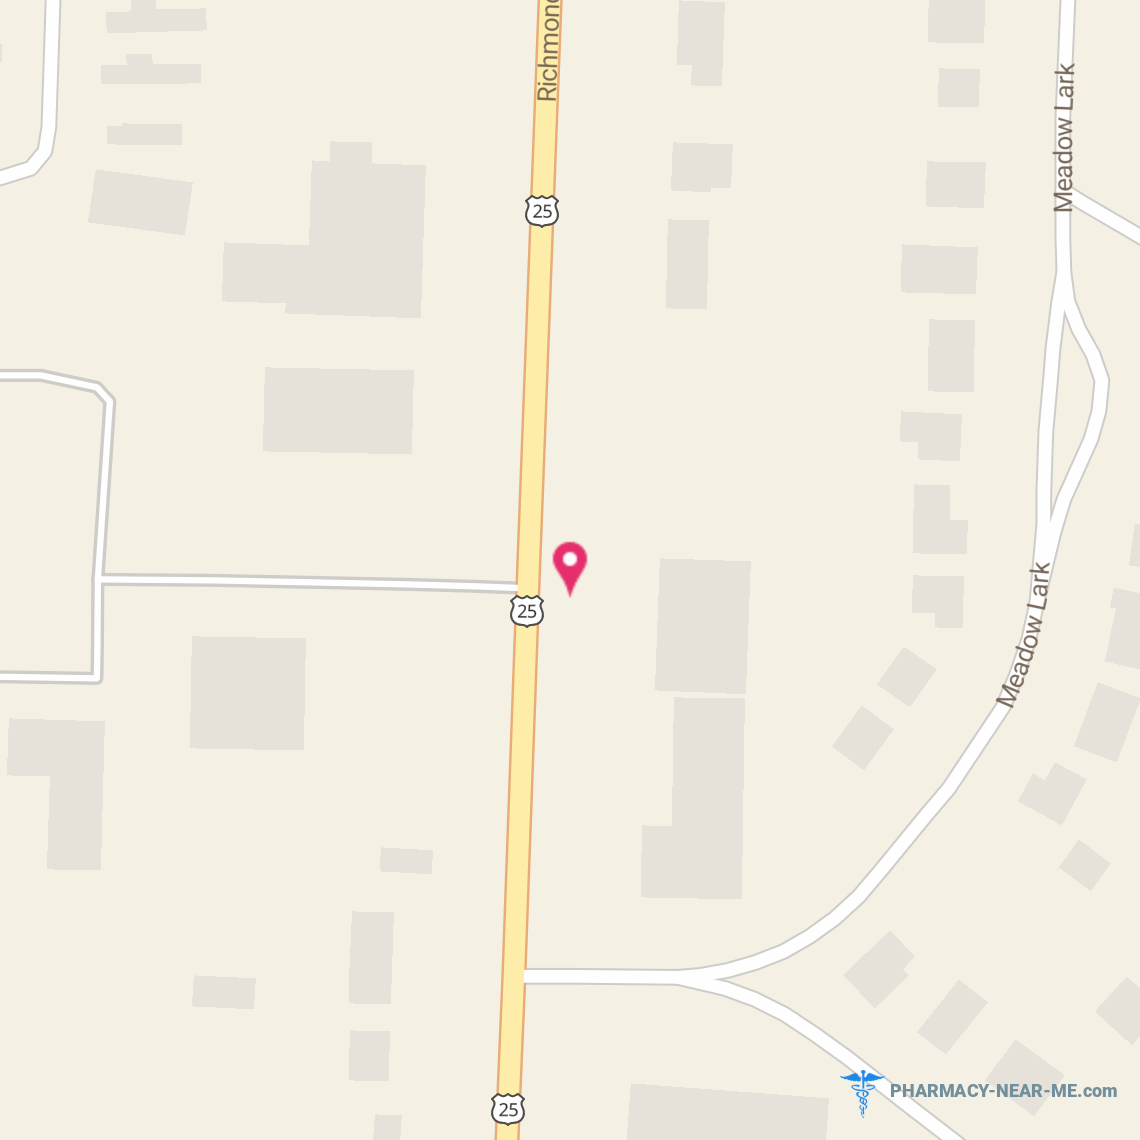 BEREA DRUG - Pharmacy Hours, Phone, Reviews & Information: 402 Richmond Road North, Berea, Kentucky 40403, United States